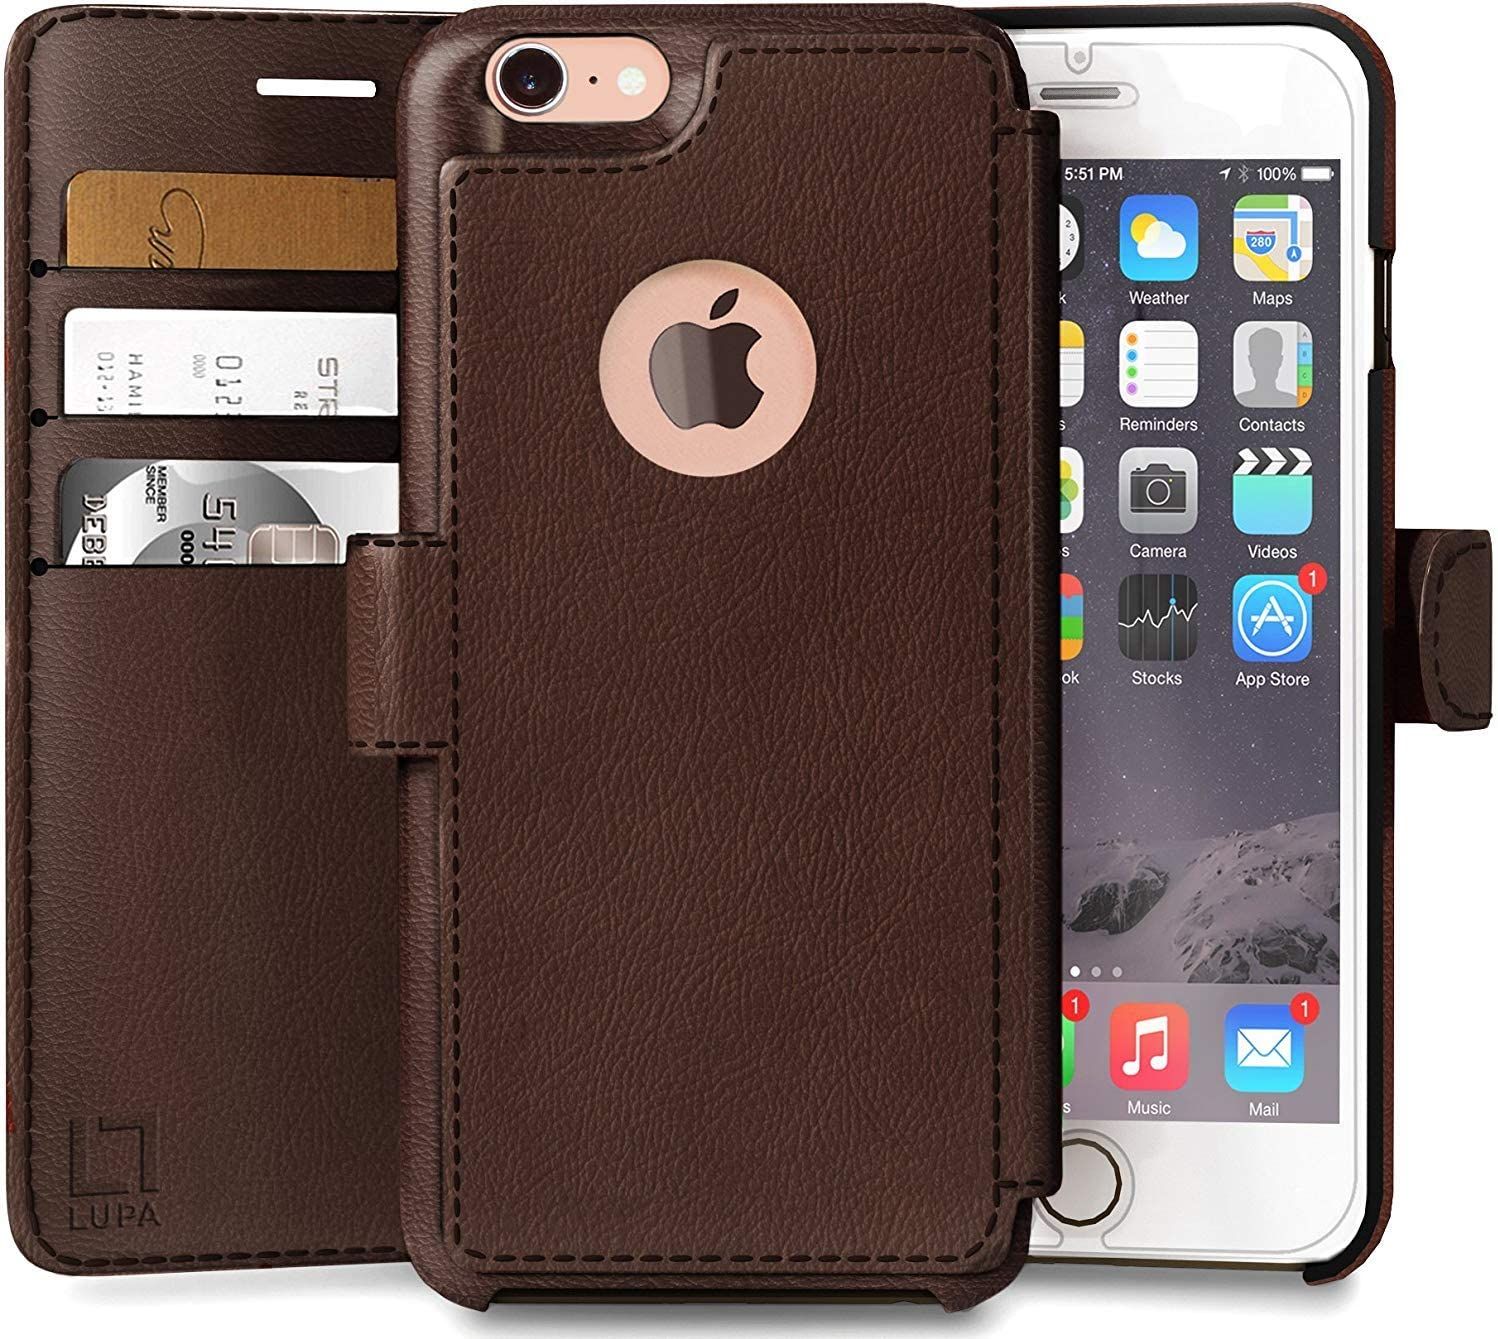 Lupa iPhone 8 Wallet Case 1